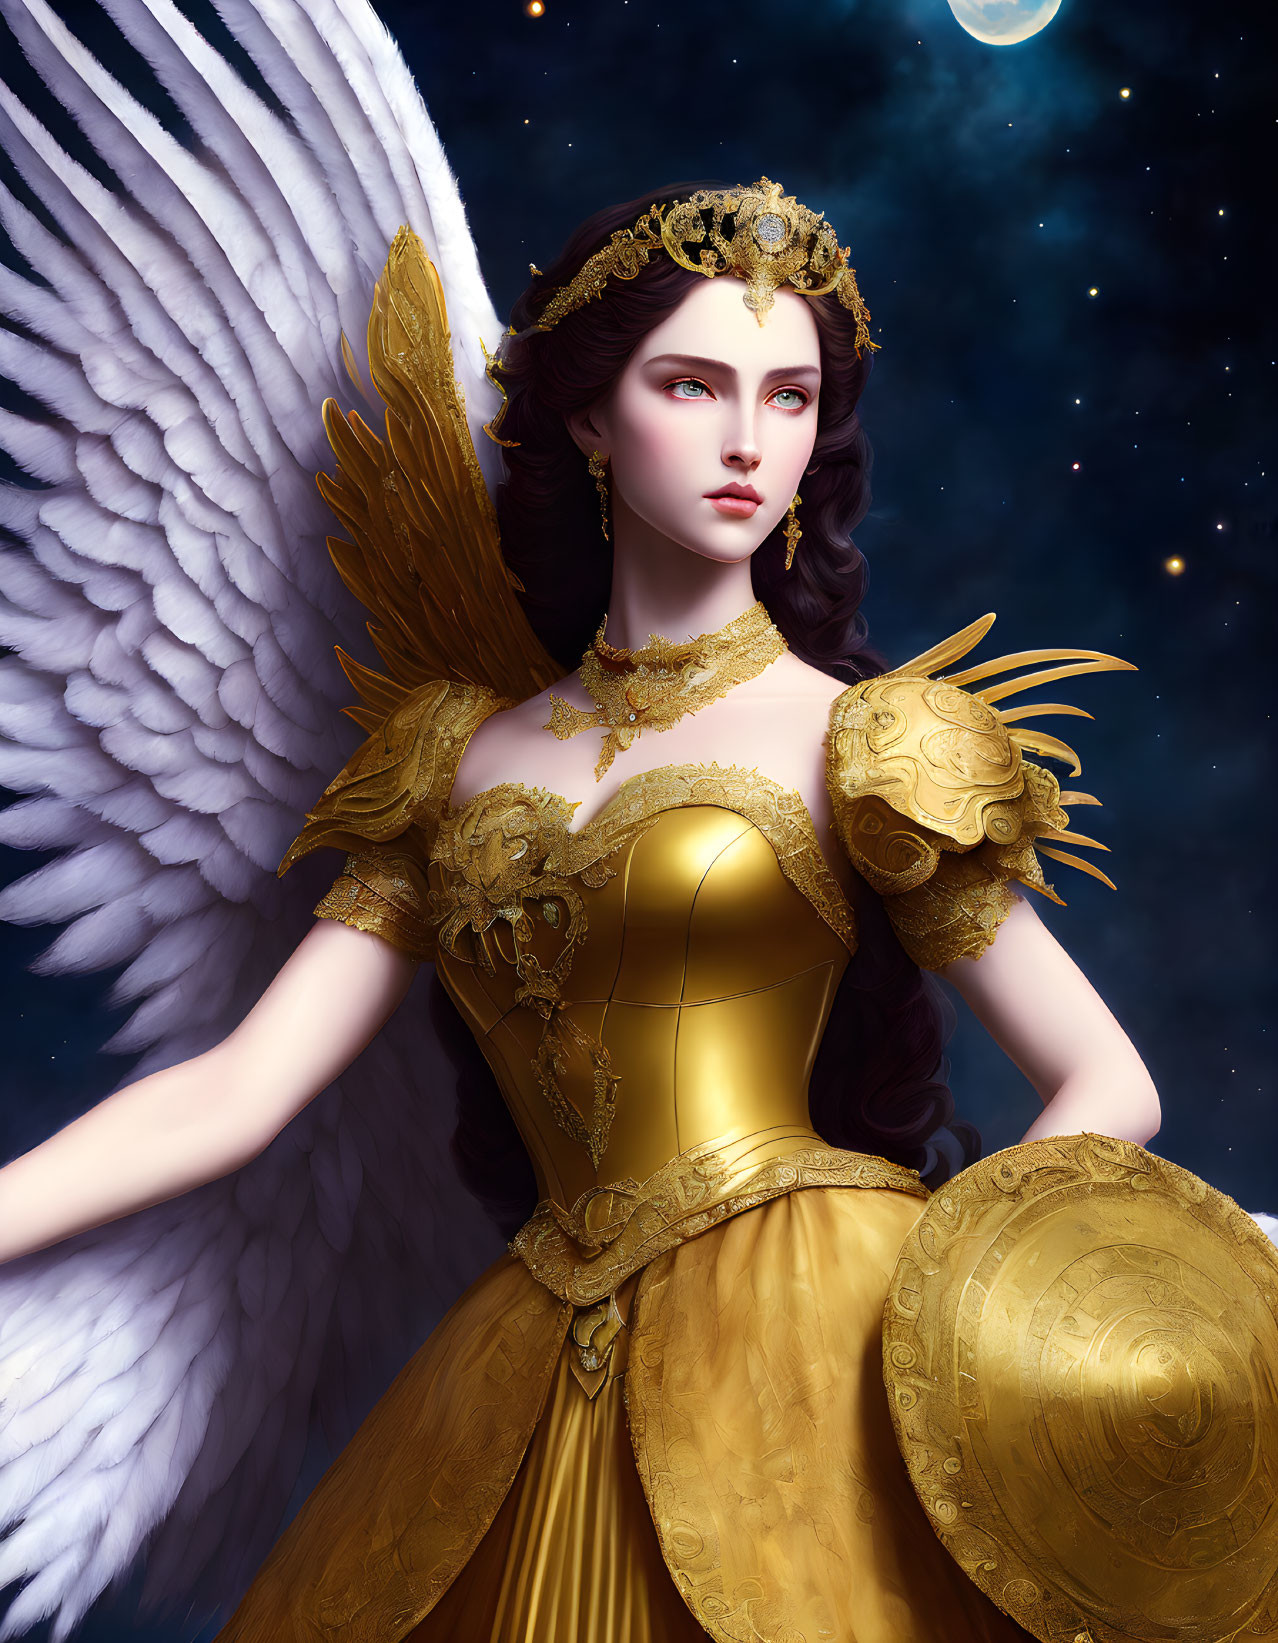 Fantasy figure with angelic wings in golden gown against starry sky